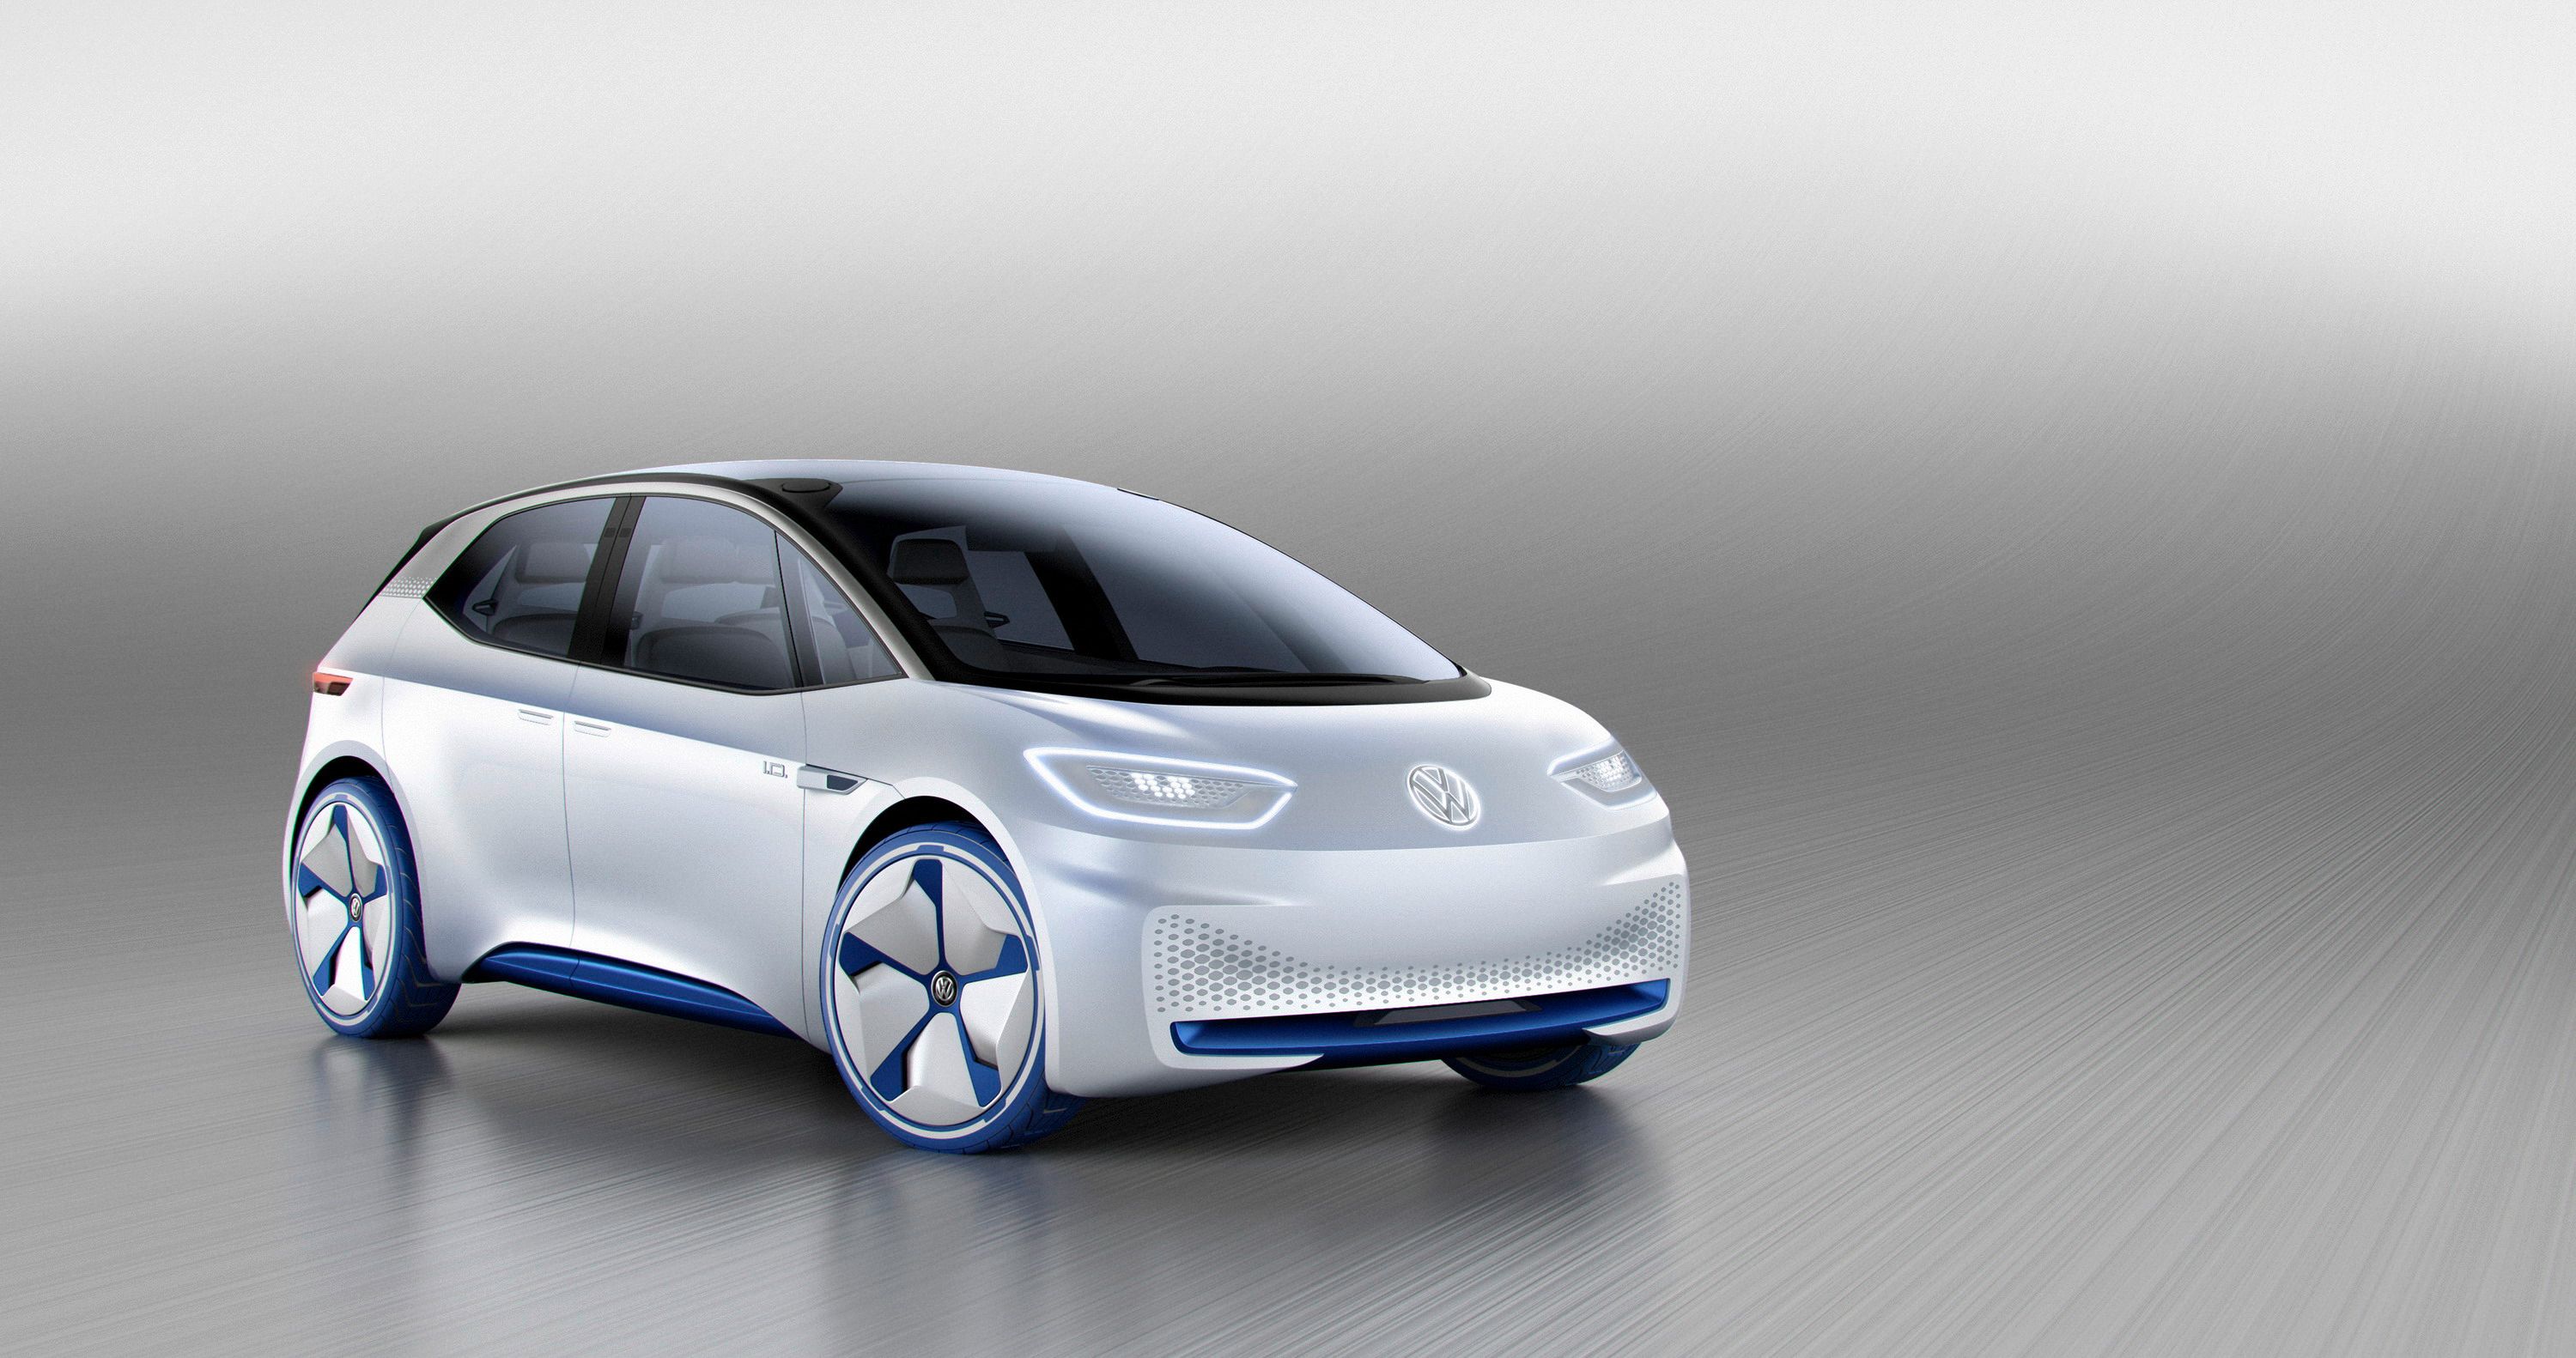 2017 The Upcoming Volkswagen ID Hatchback Will Carry Lots of Concept DNA